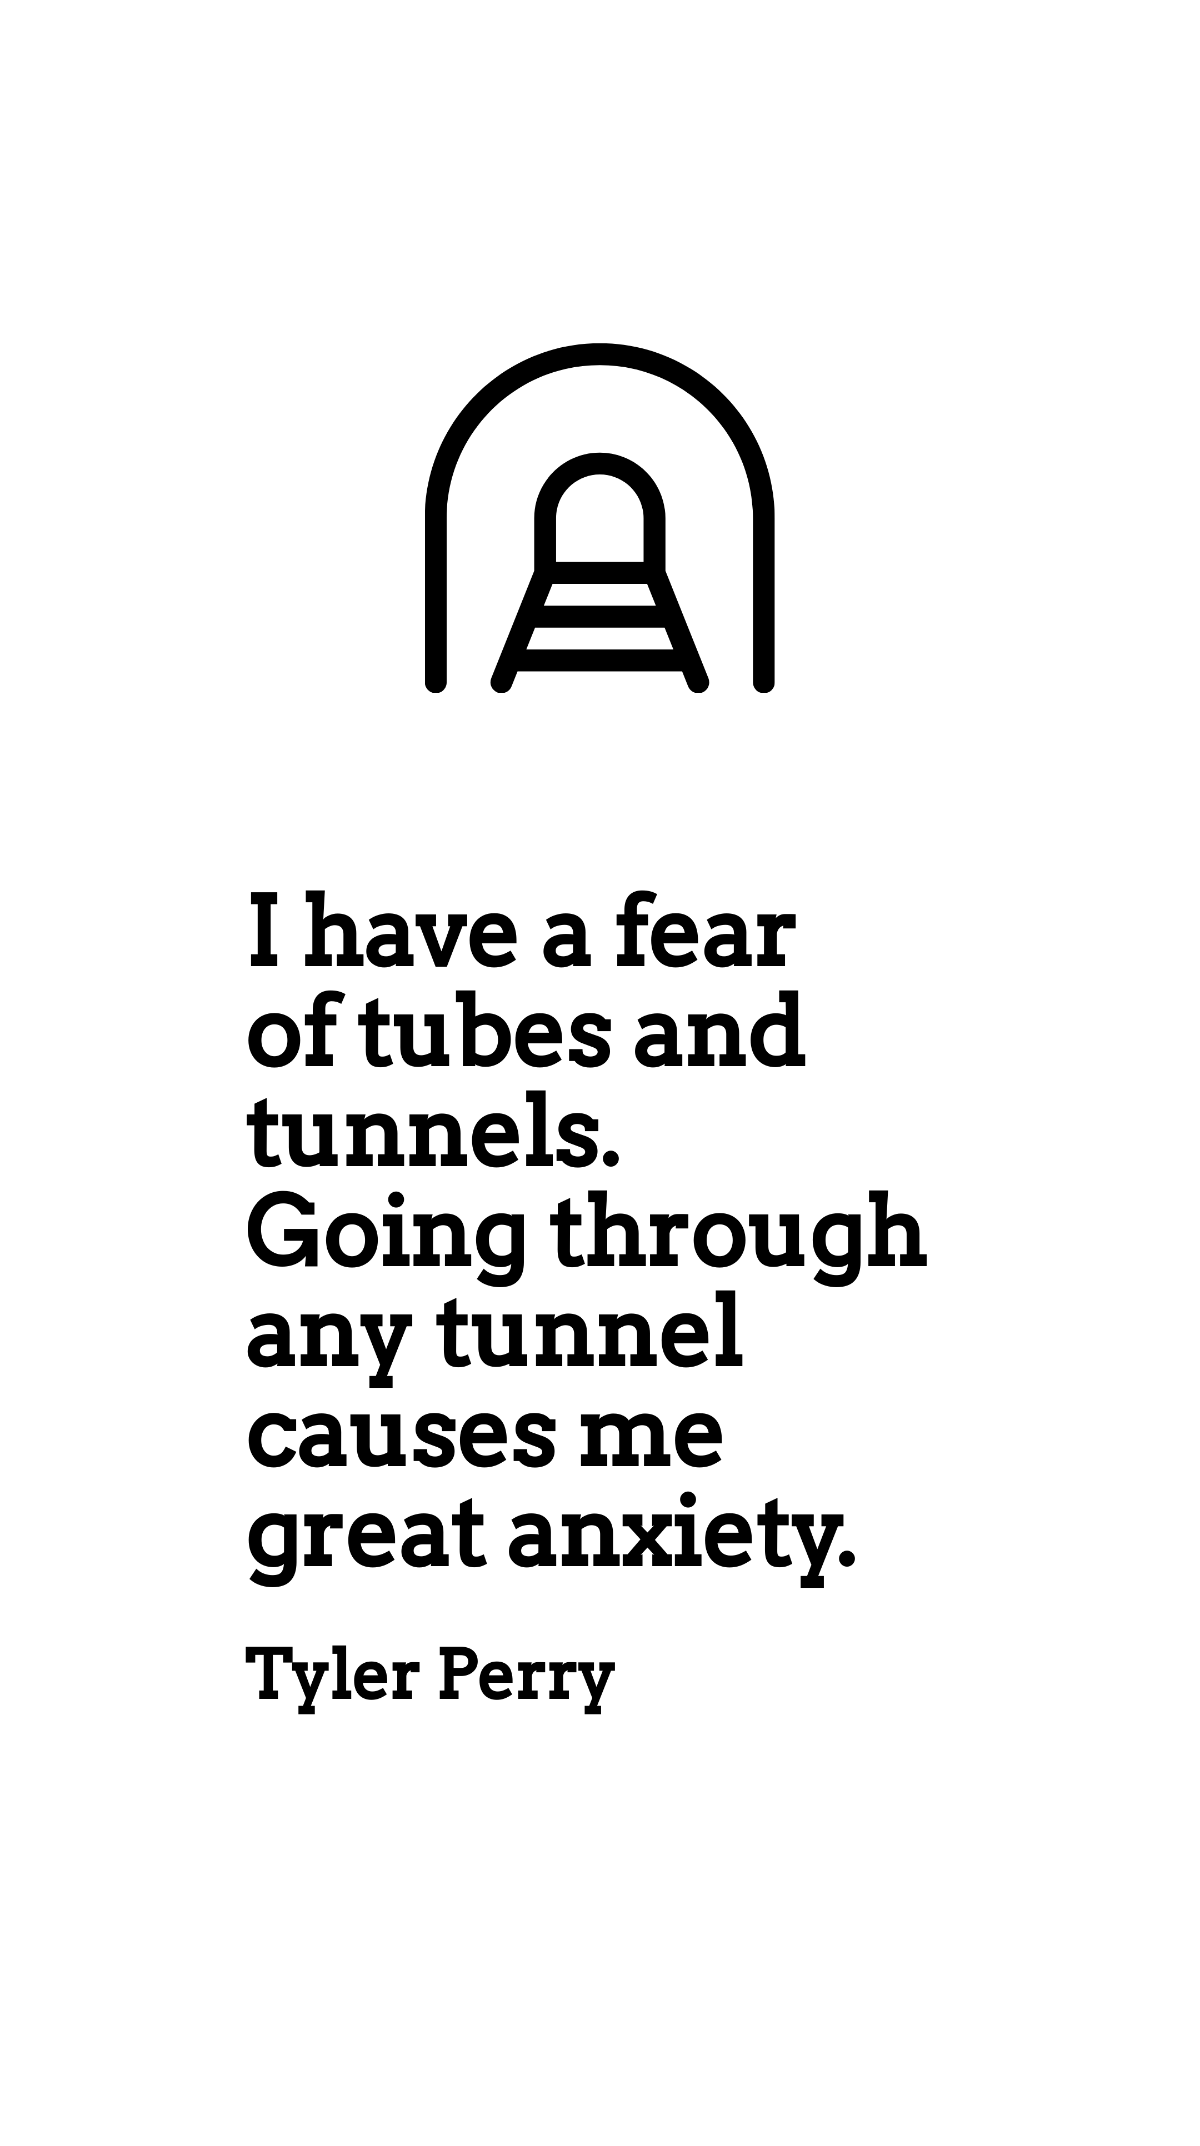 Tyler Perry - I have a fear of tubes and tunnels. Going through any tunnel causes me great anxiety.